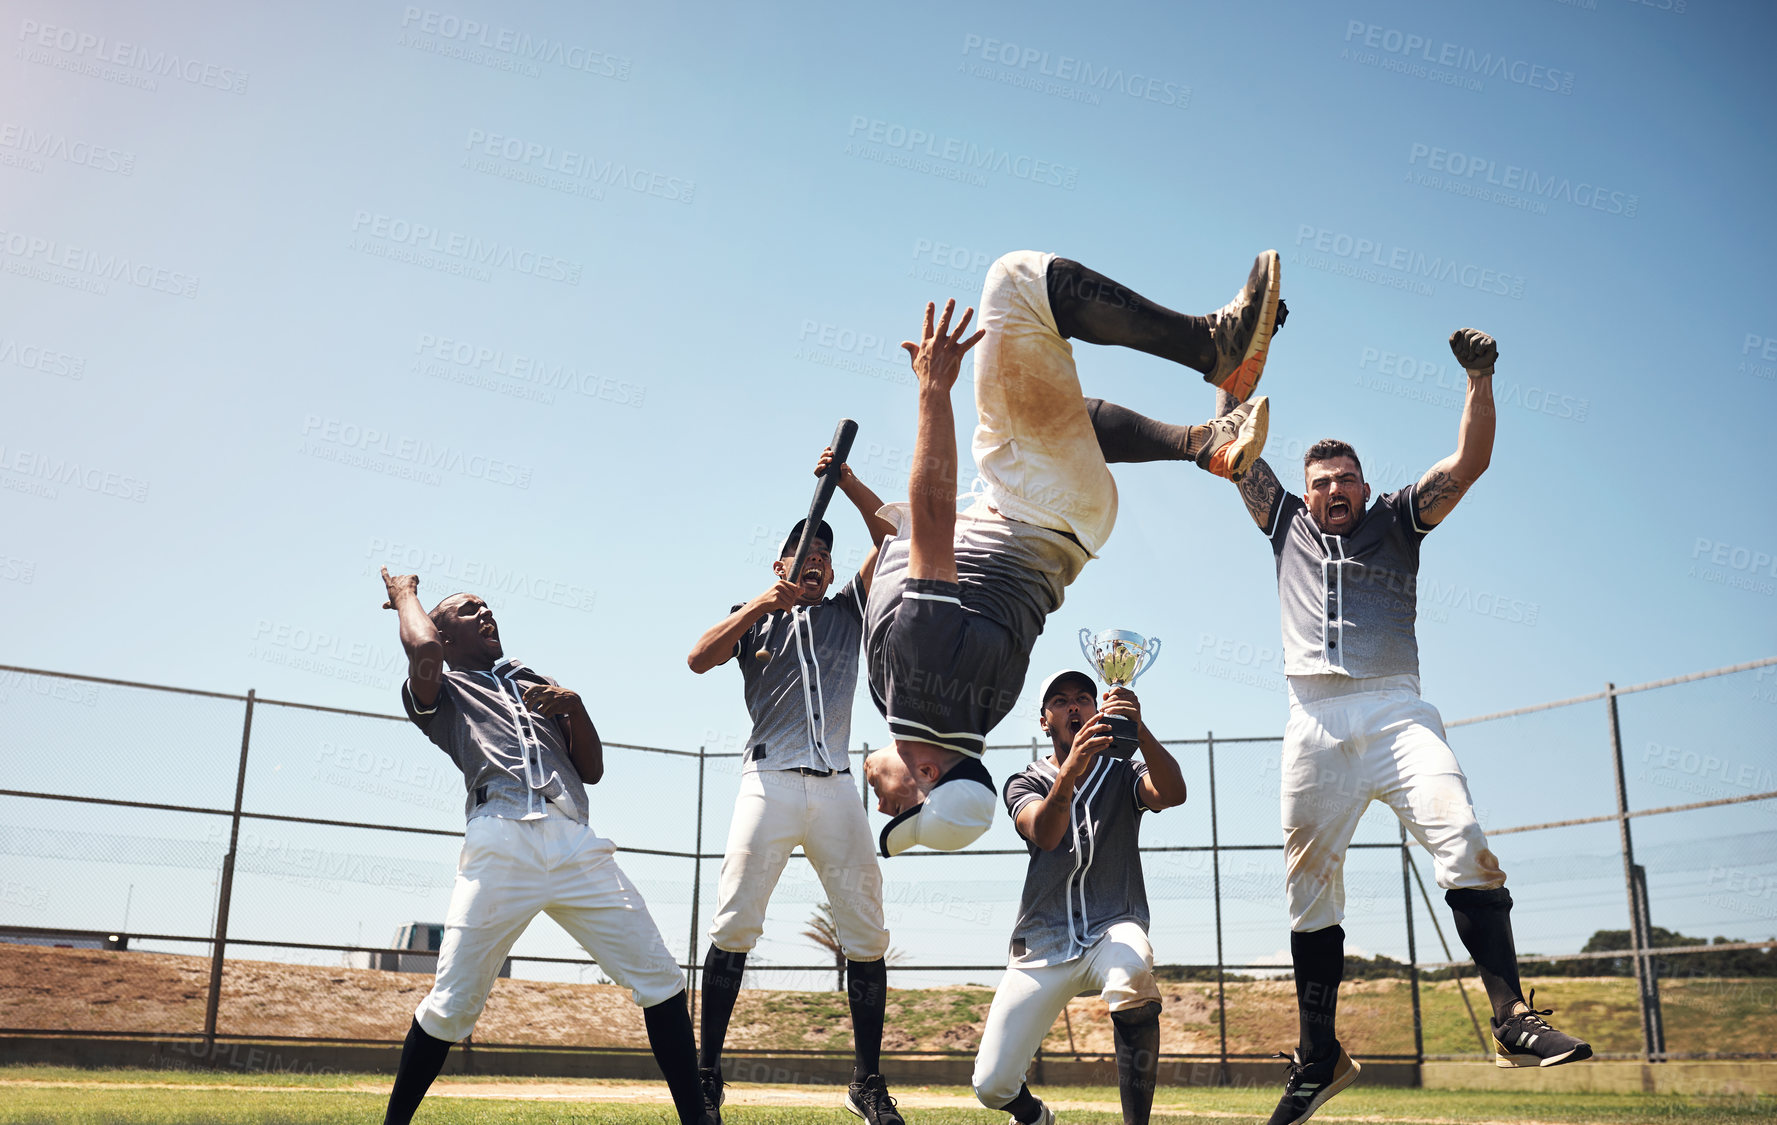 Buy stock photo Shot of a group of young baseball players celebrating after winning a game